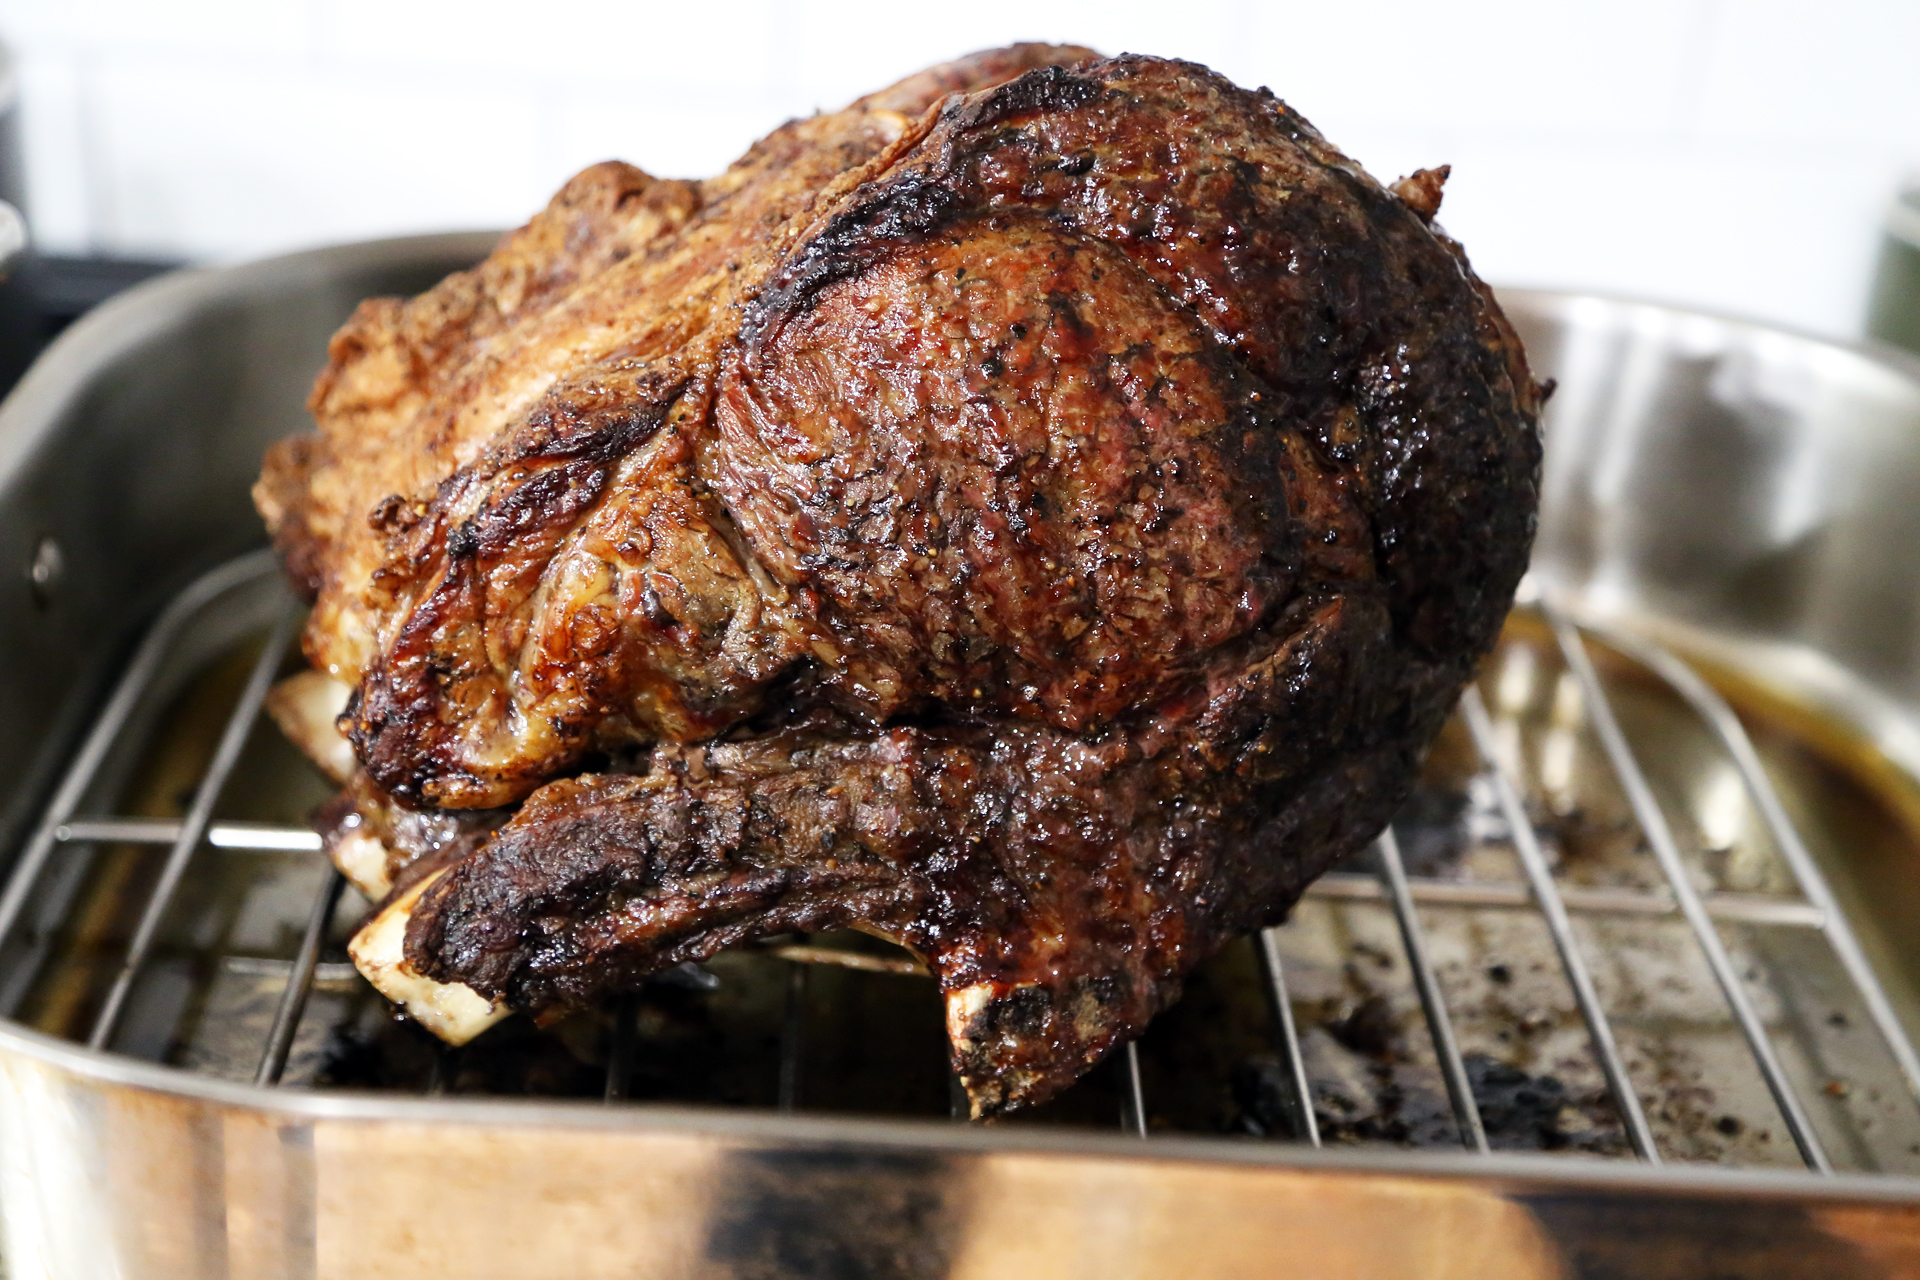 Roast until a meat thermometer registers 115F for rare or 125F for medium-rare, about 1 ½ to 2 hours.